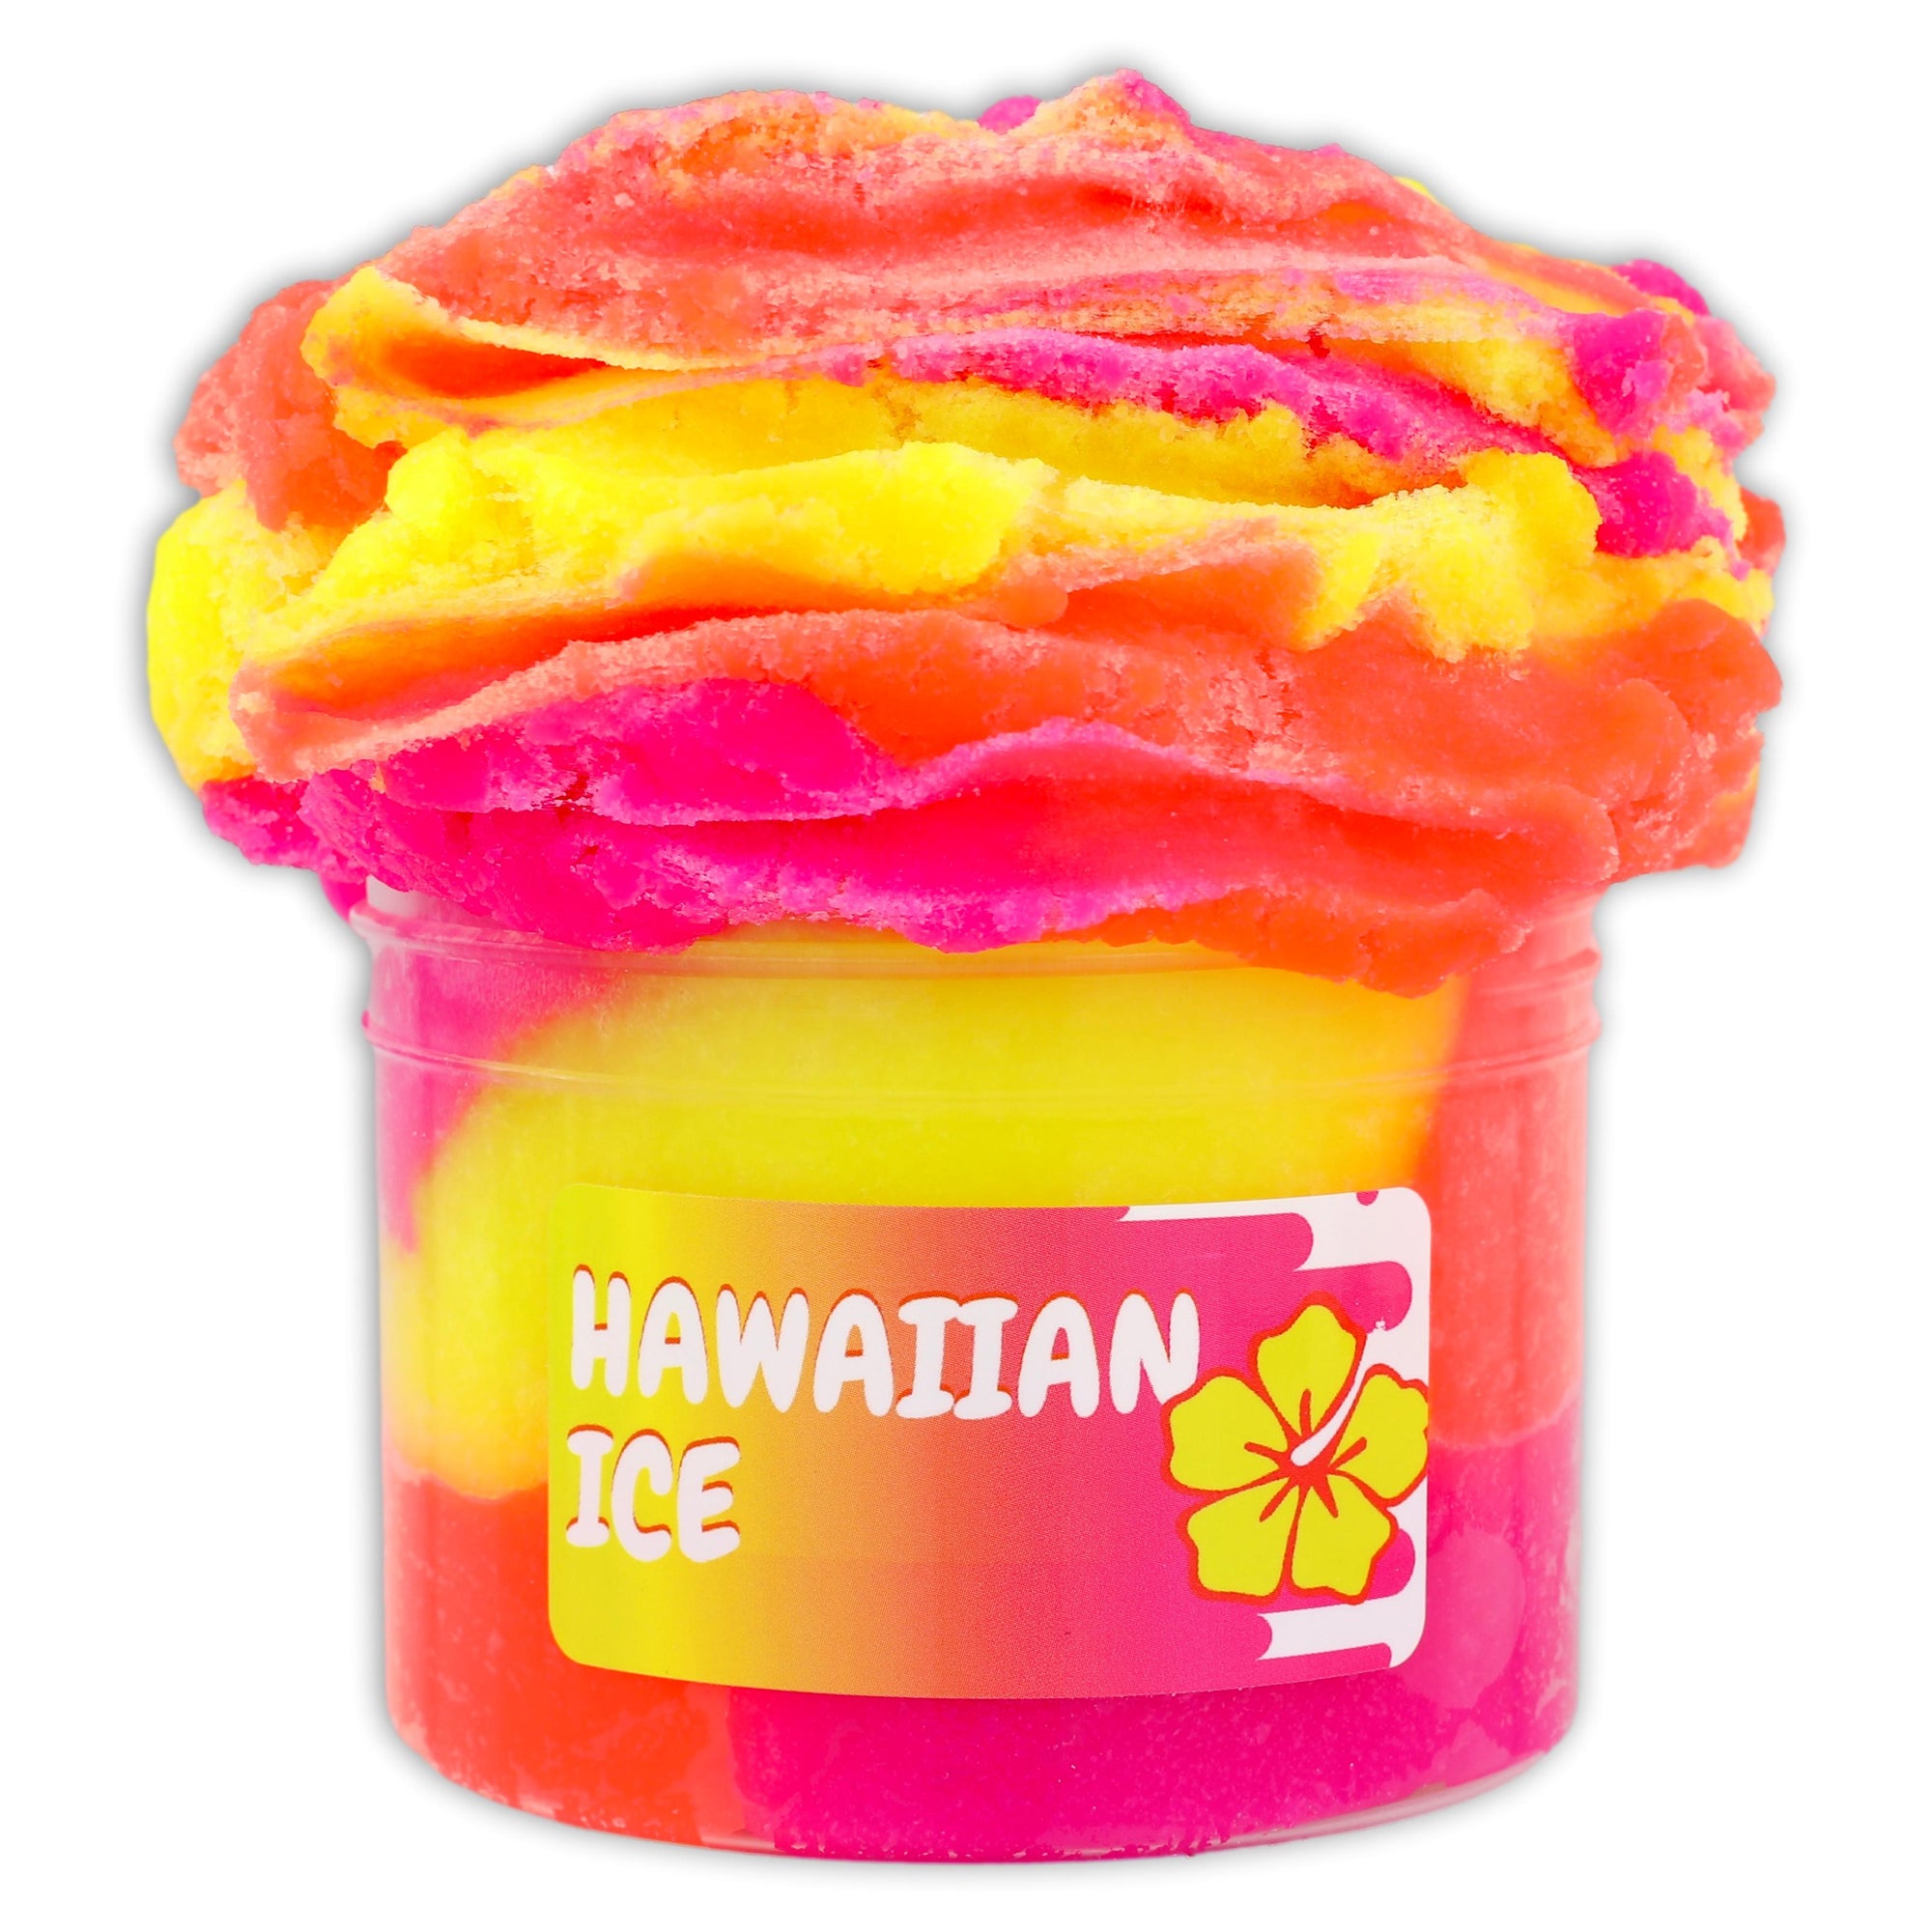 Dope Slimes Hawaiian Ice Cloud Slime 8 oz Container Multi Colored